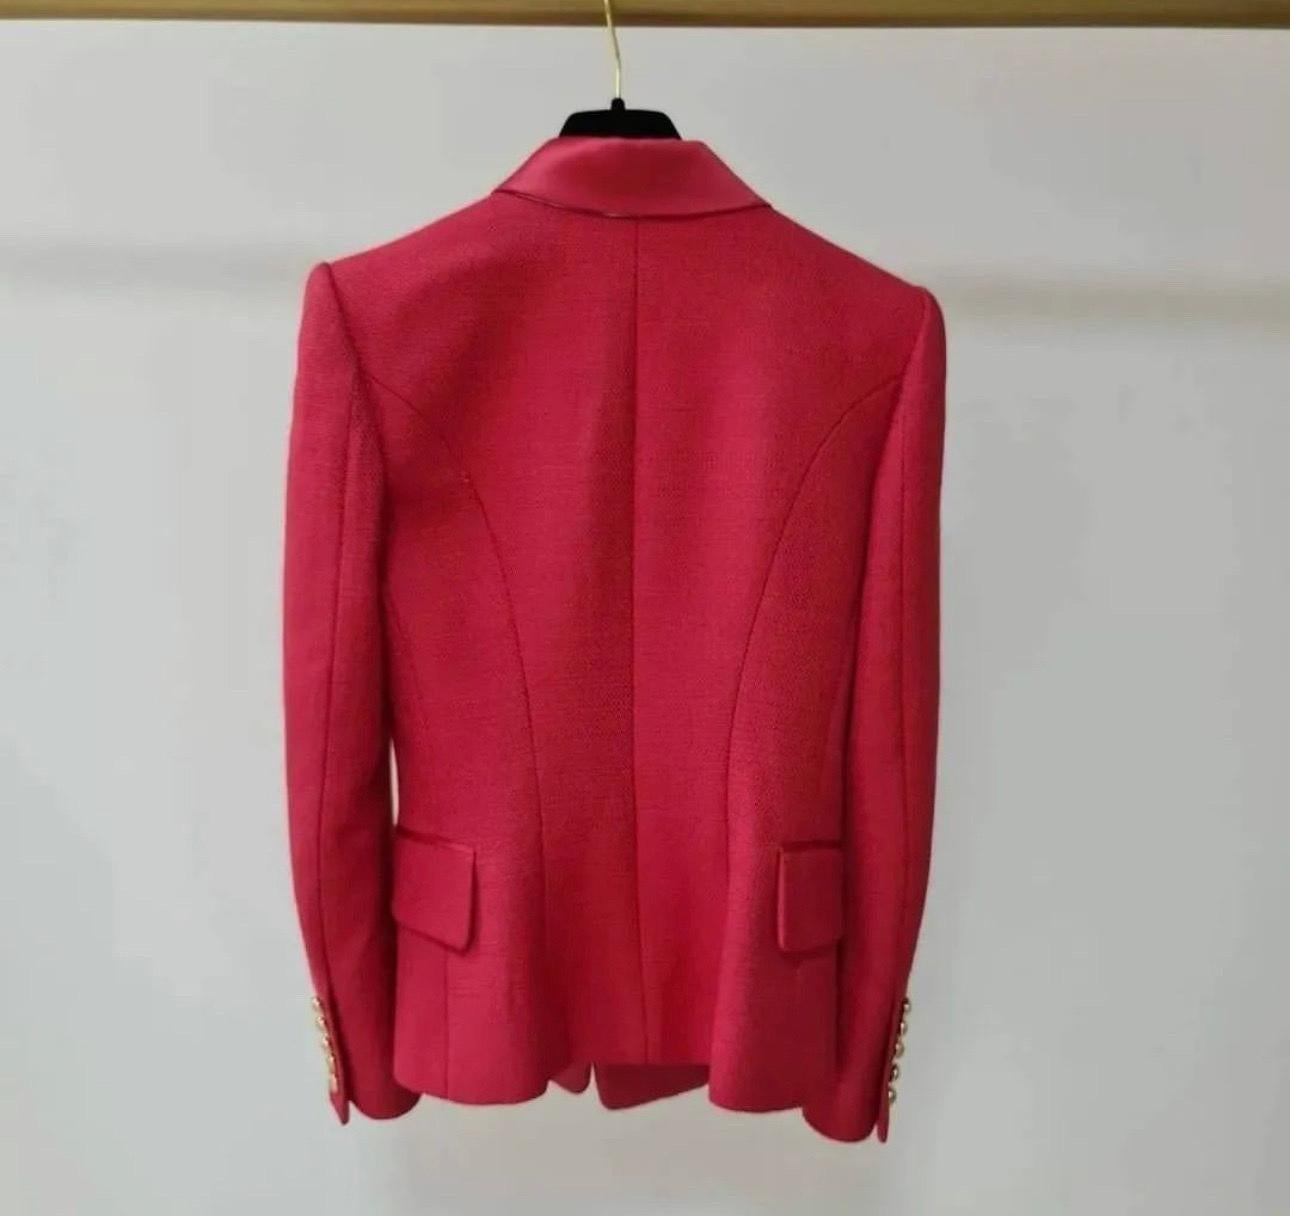 Balmain  Single Breasted Blazer

Sz.36

Very good condition. Have some yellowness on the lining in armpit area.

